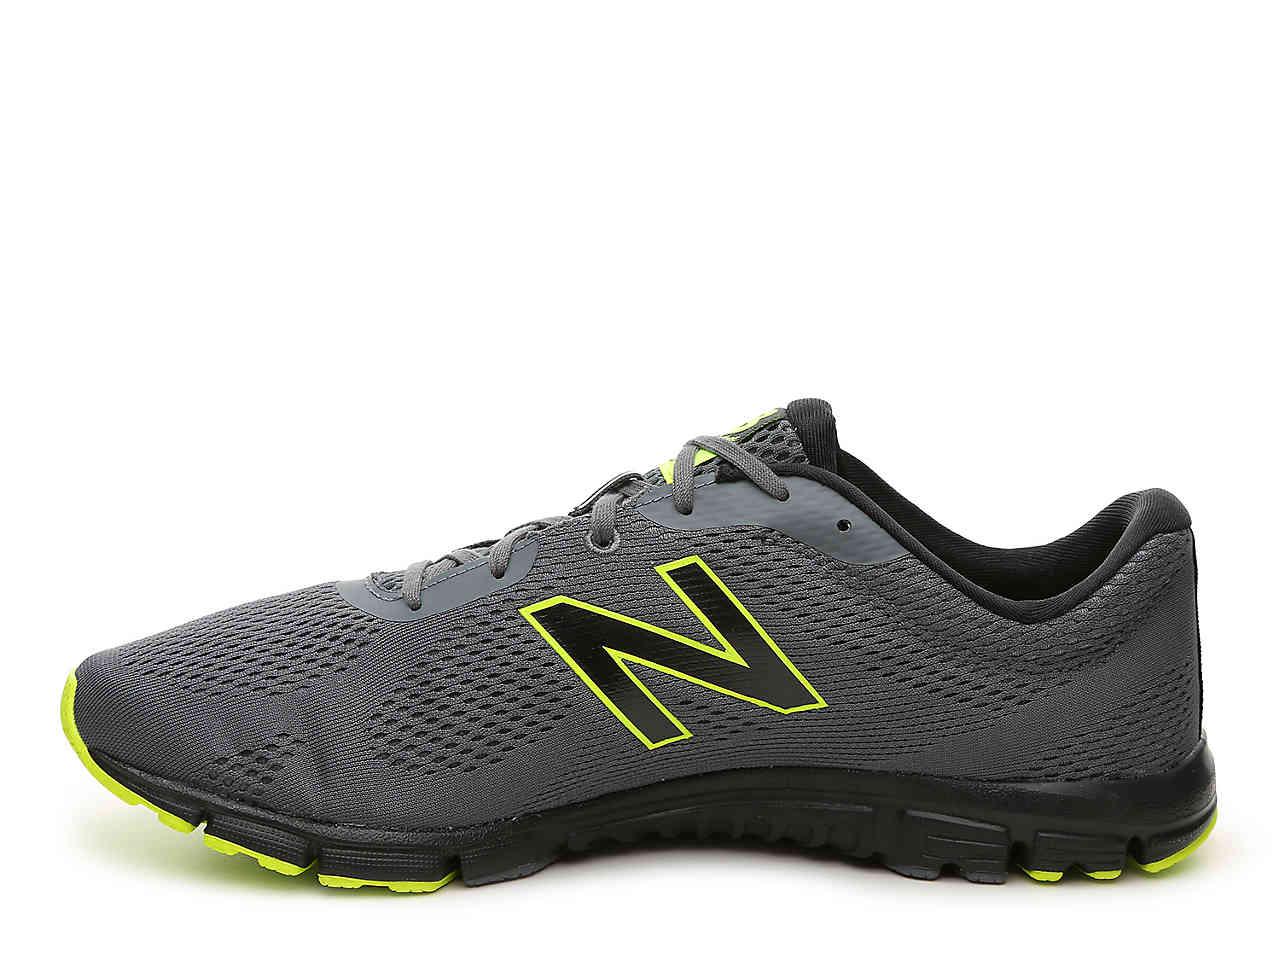 New Balance Synthetic 600 V2 Lightweight Running Shoe in Charcoal Grey ...